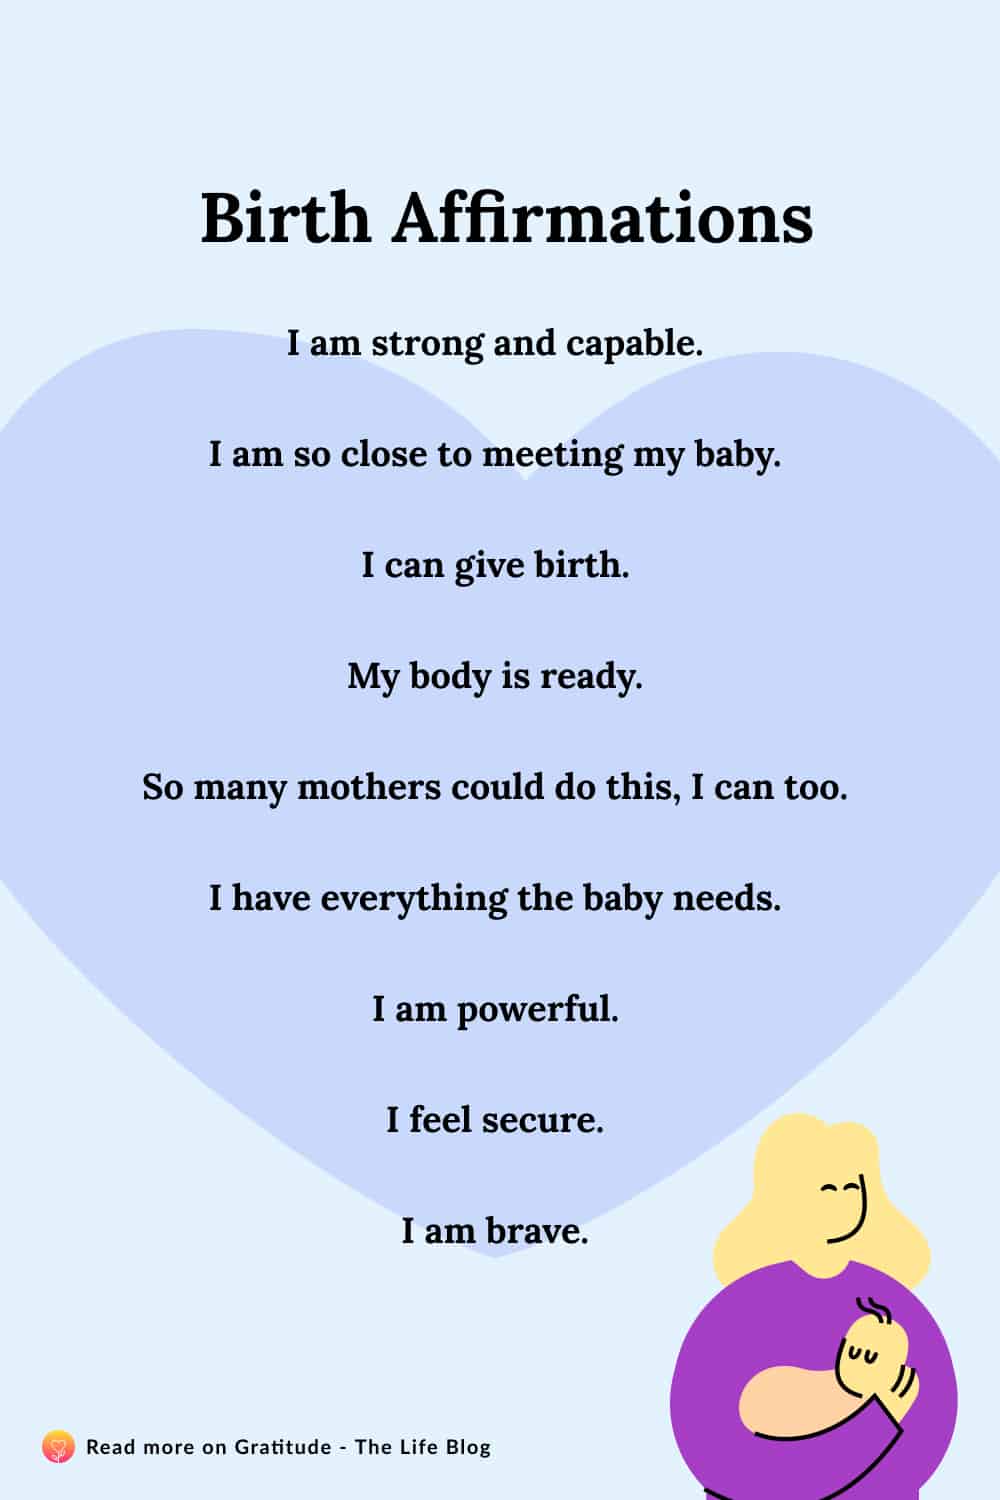 Image with list of birth affirmations